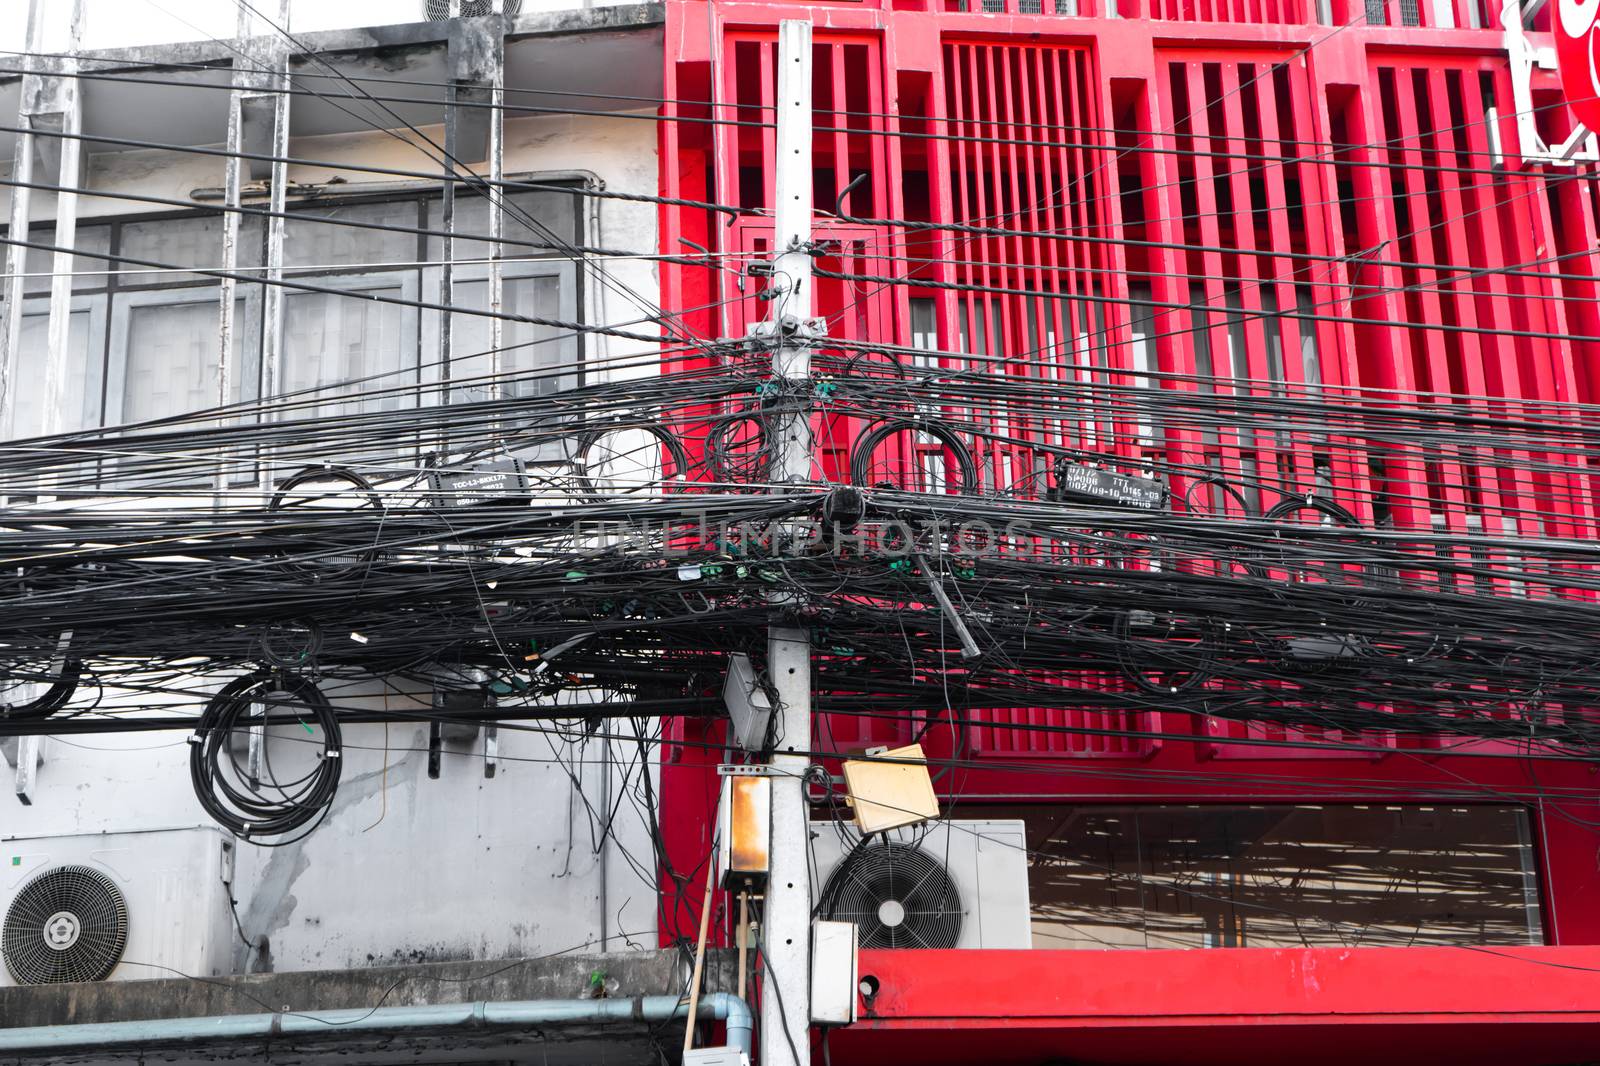 Electrical wiring post in thailand. A huge number of wires on a pole. Against the background of a red and white building.